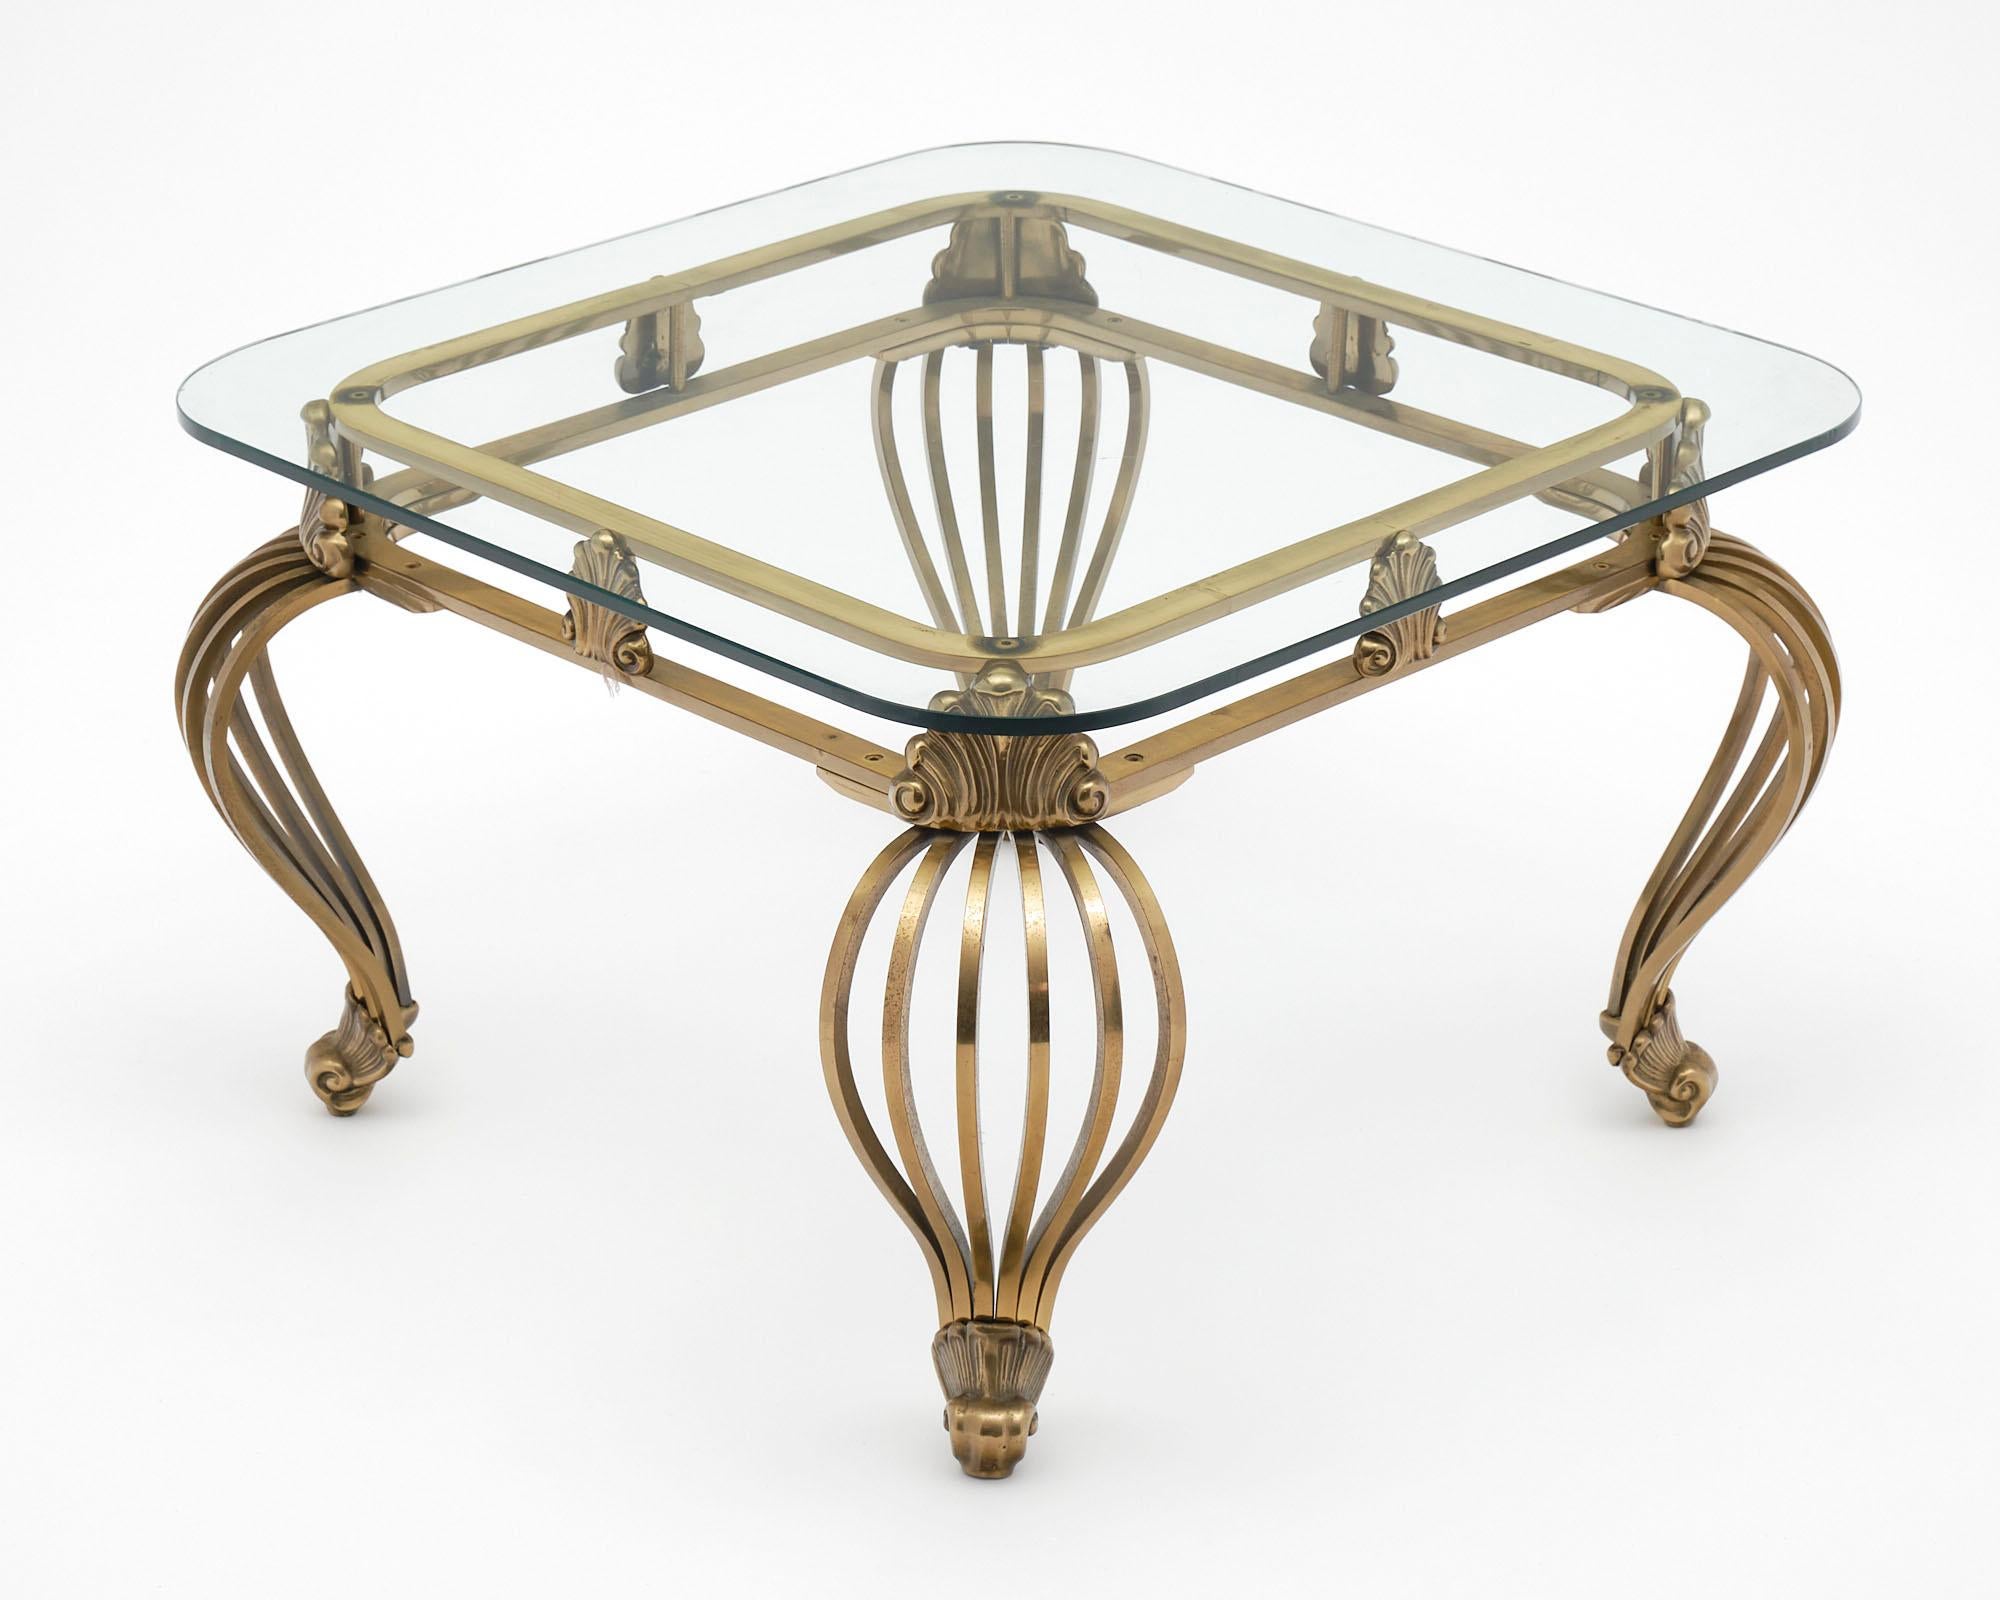 Side table of solid brass form the Italian Art Deco Period. This exceptional piece boasts stylized cabriole legs and shells are featuring in the apron.